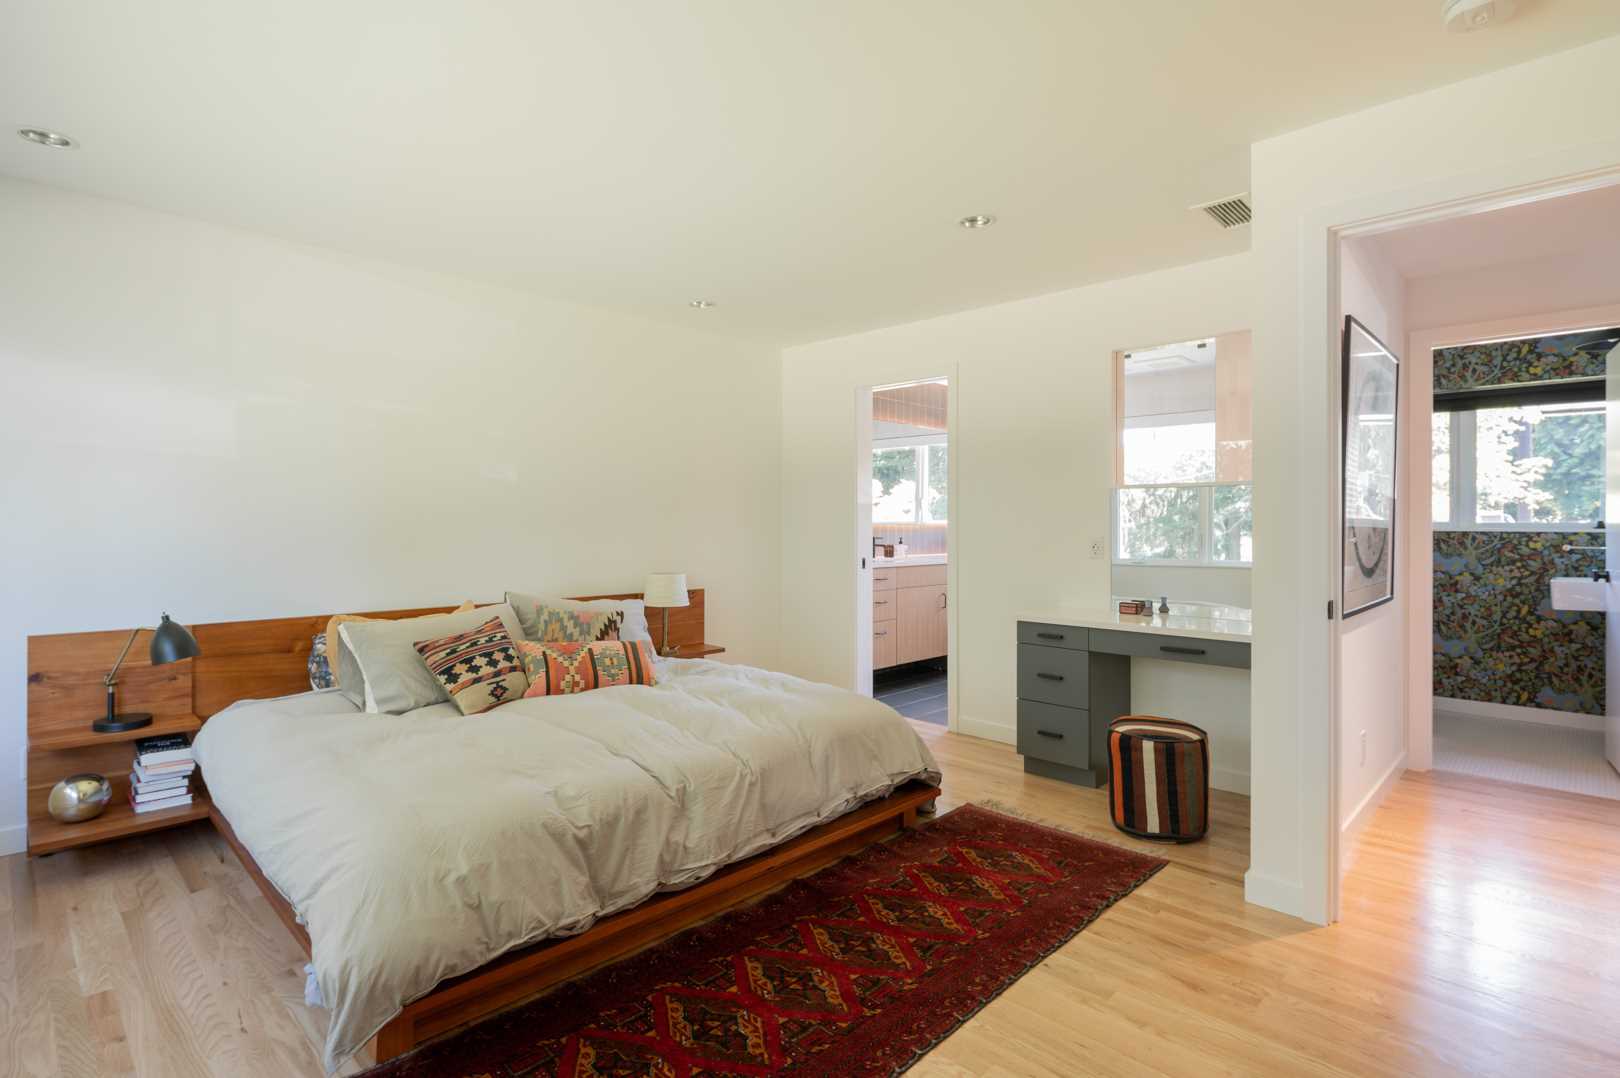 At the end of the hallway is the primary bedroom which has been minimally furnished with a wood bed frame.